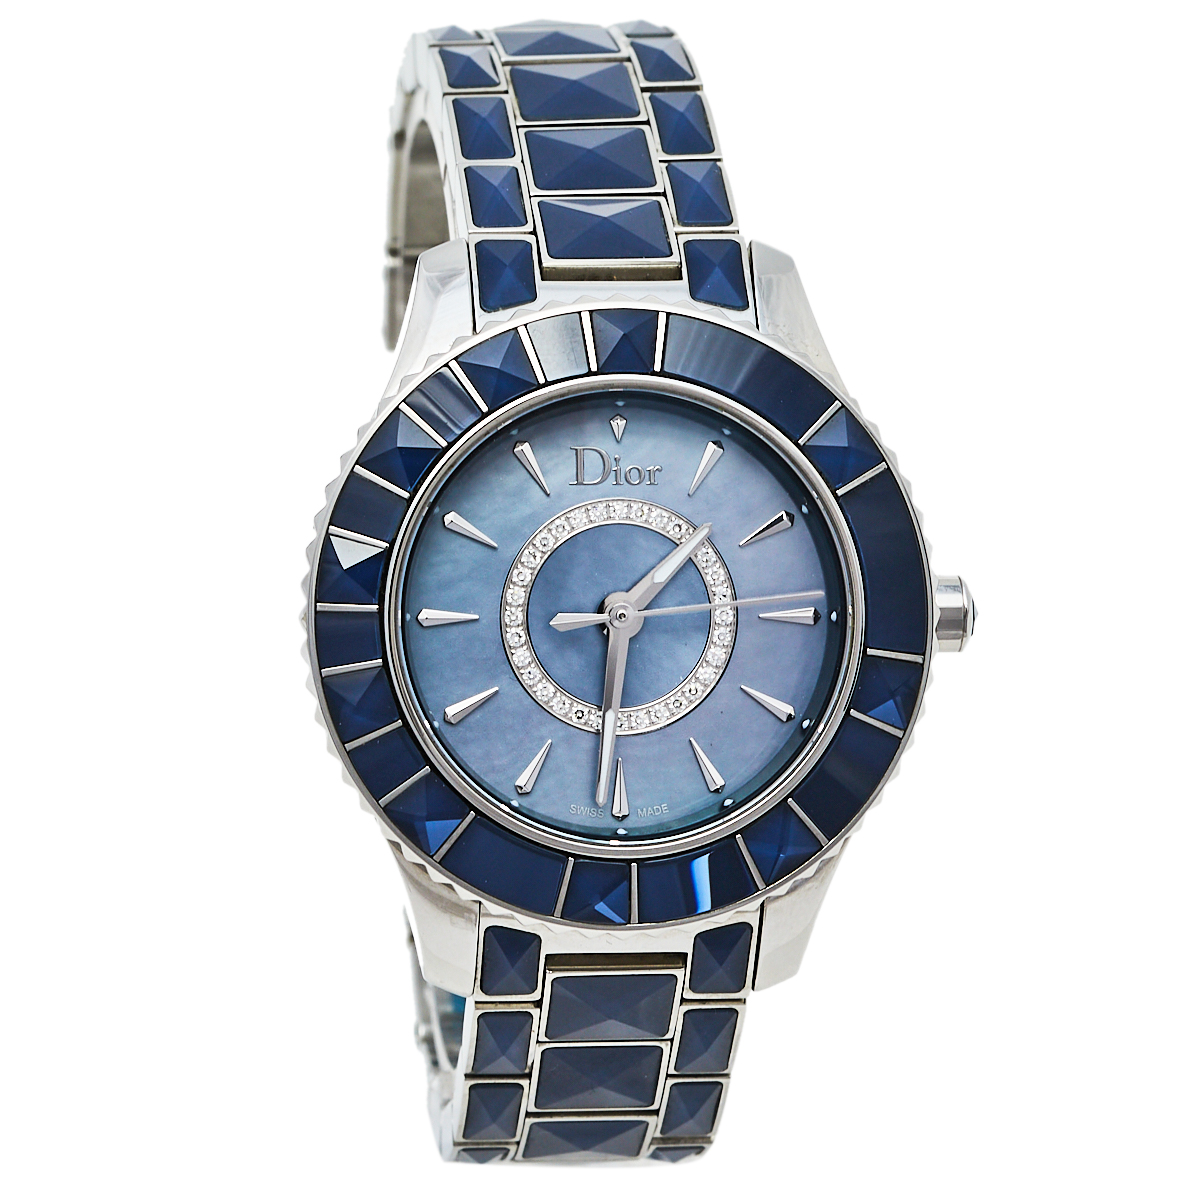 Dior Blue Mother Of Pearl Stainless Steel Christal CD143117 Women's Wristwatch 33 mm